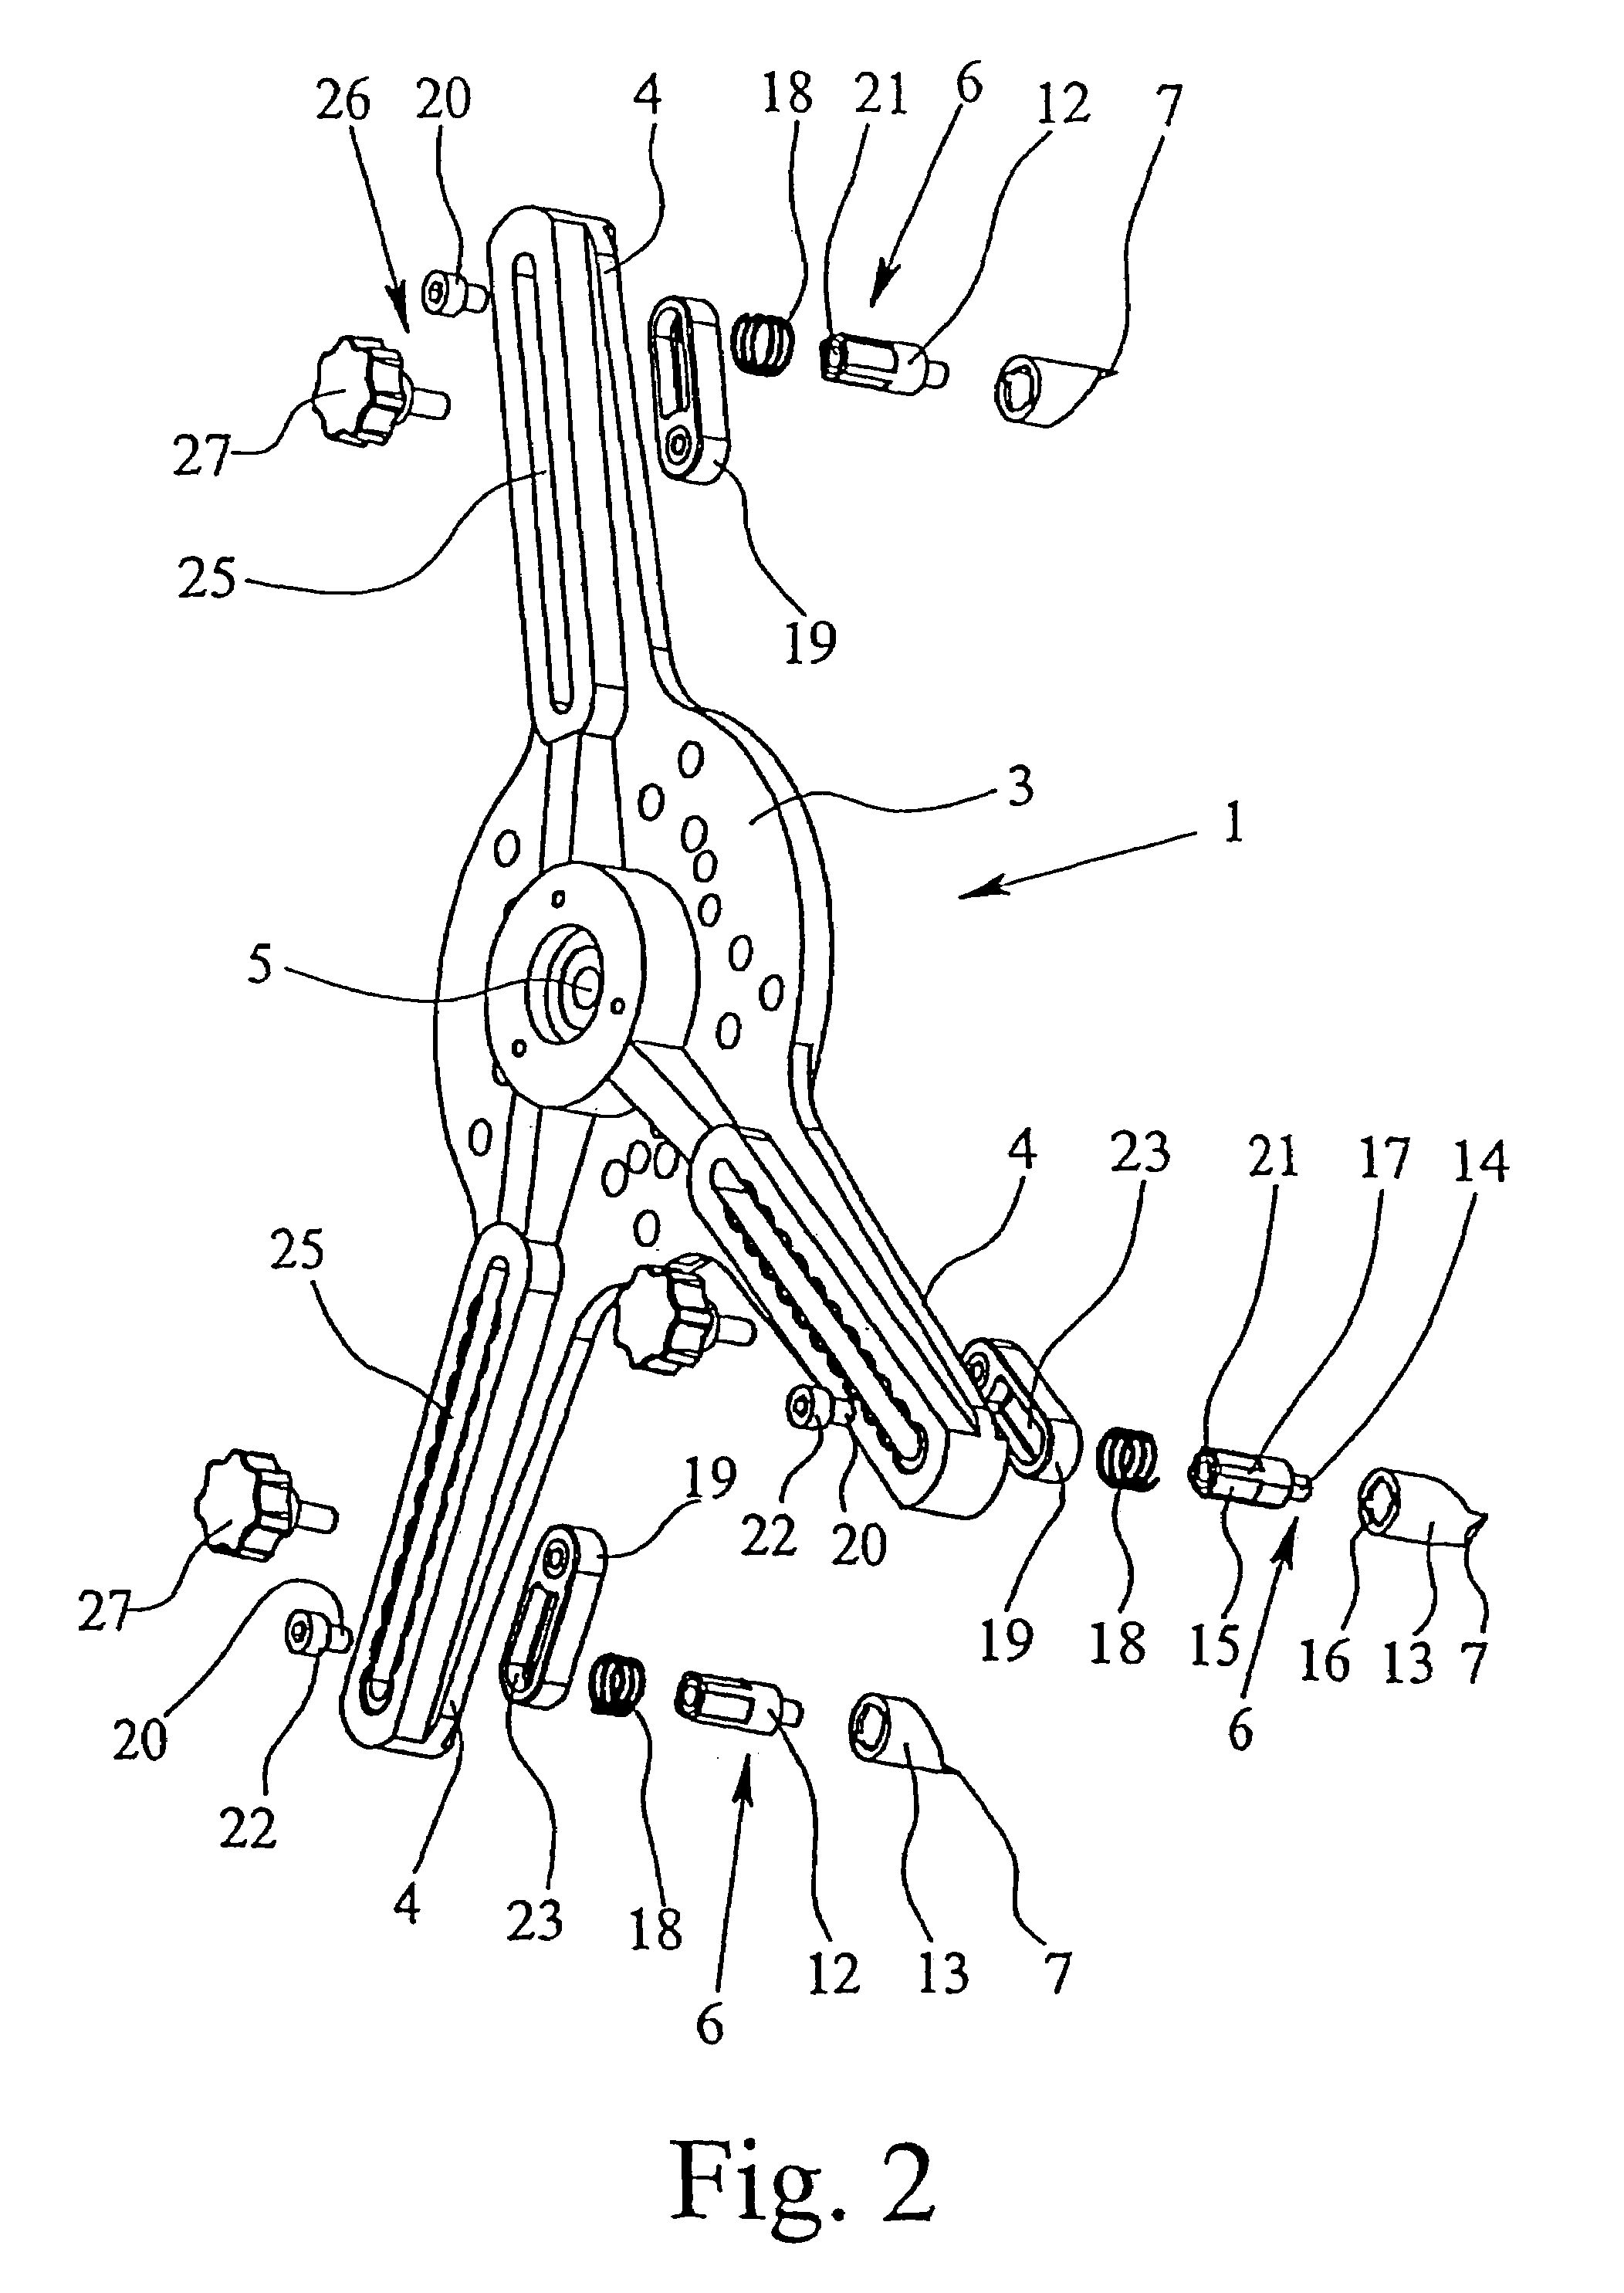 Retaining device for a wheel alignment analyzer